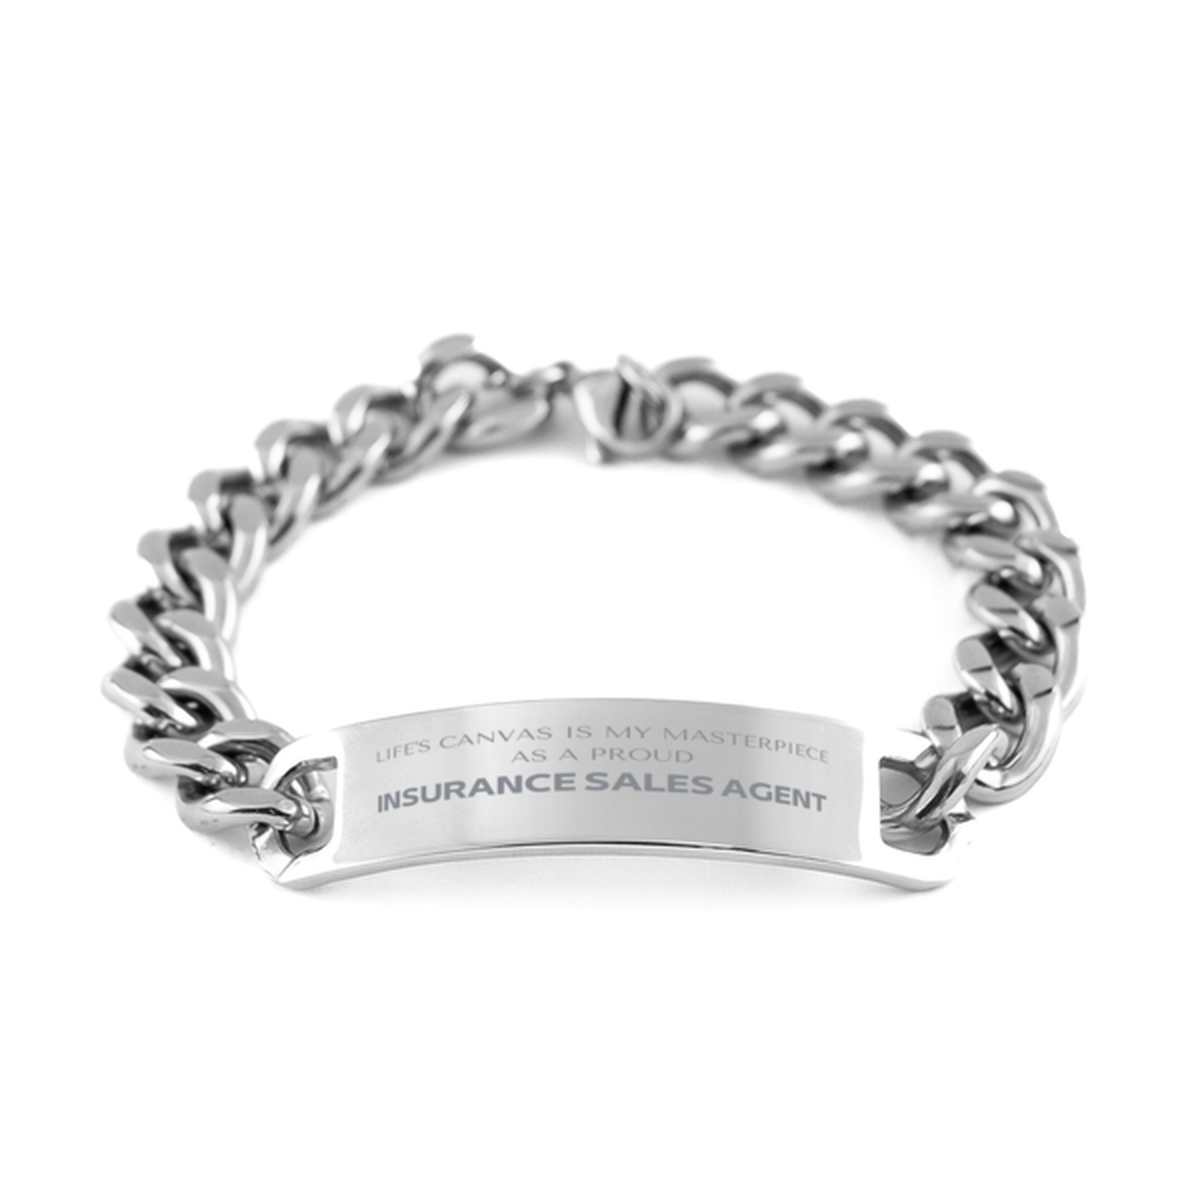 Proud Insurance Sales Agent Gifts, Life's canvas is my masterpiece, Epic Birthday Christmas Unique Cuban Chain Stainless Steel Bracelet For Insurance Sales Agent, Coworkers, Men, Women, Friends